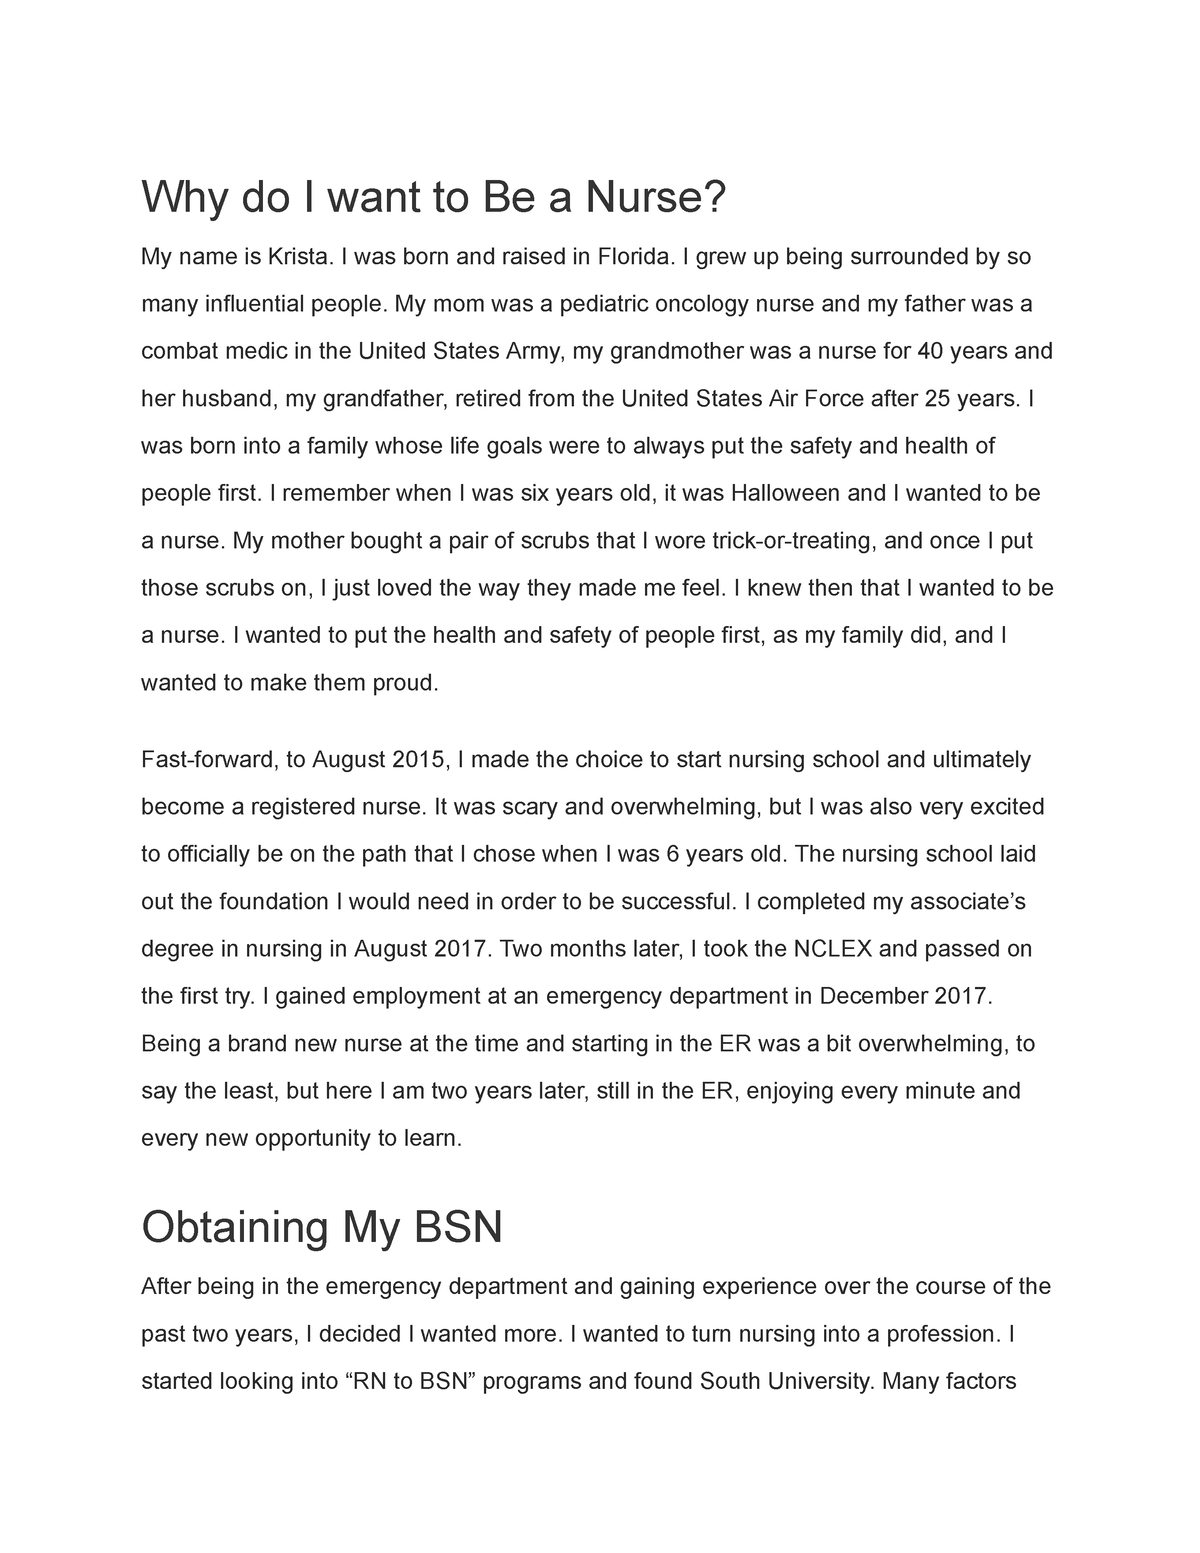 250 word essay on why i want to be a nurse